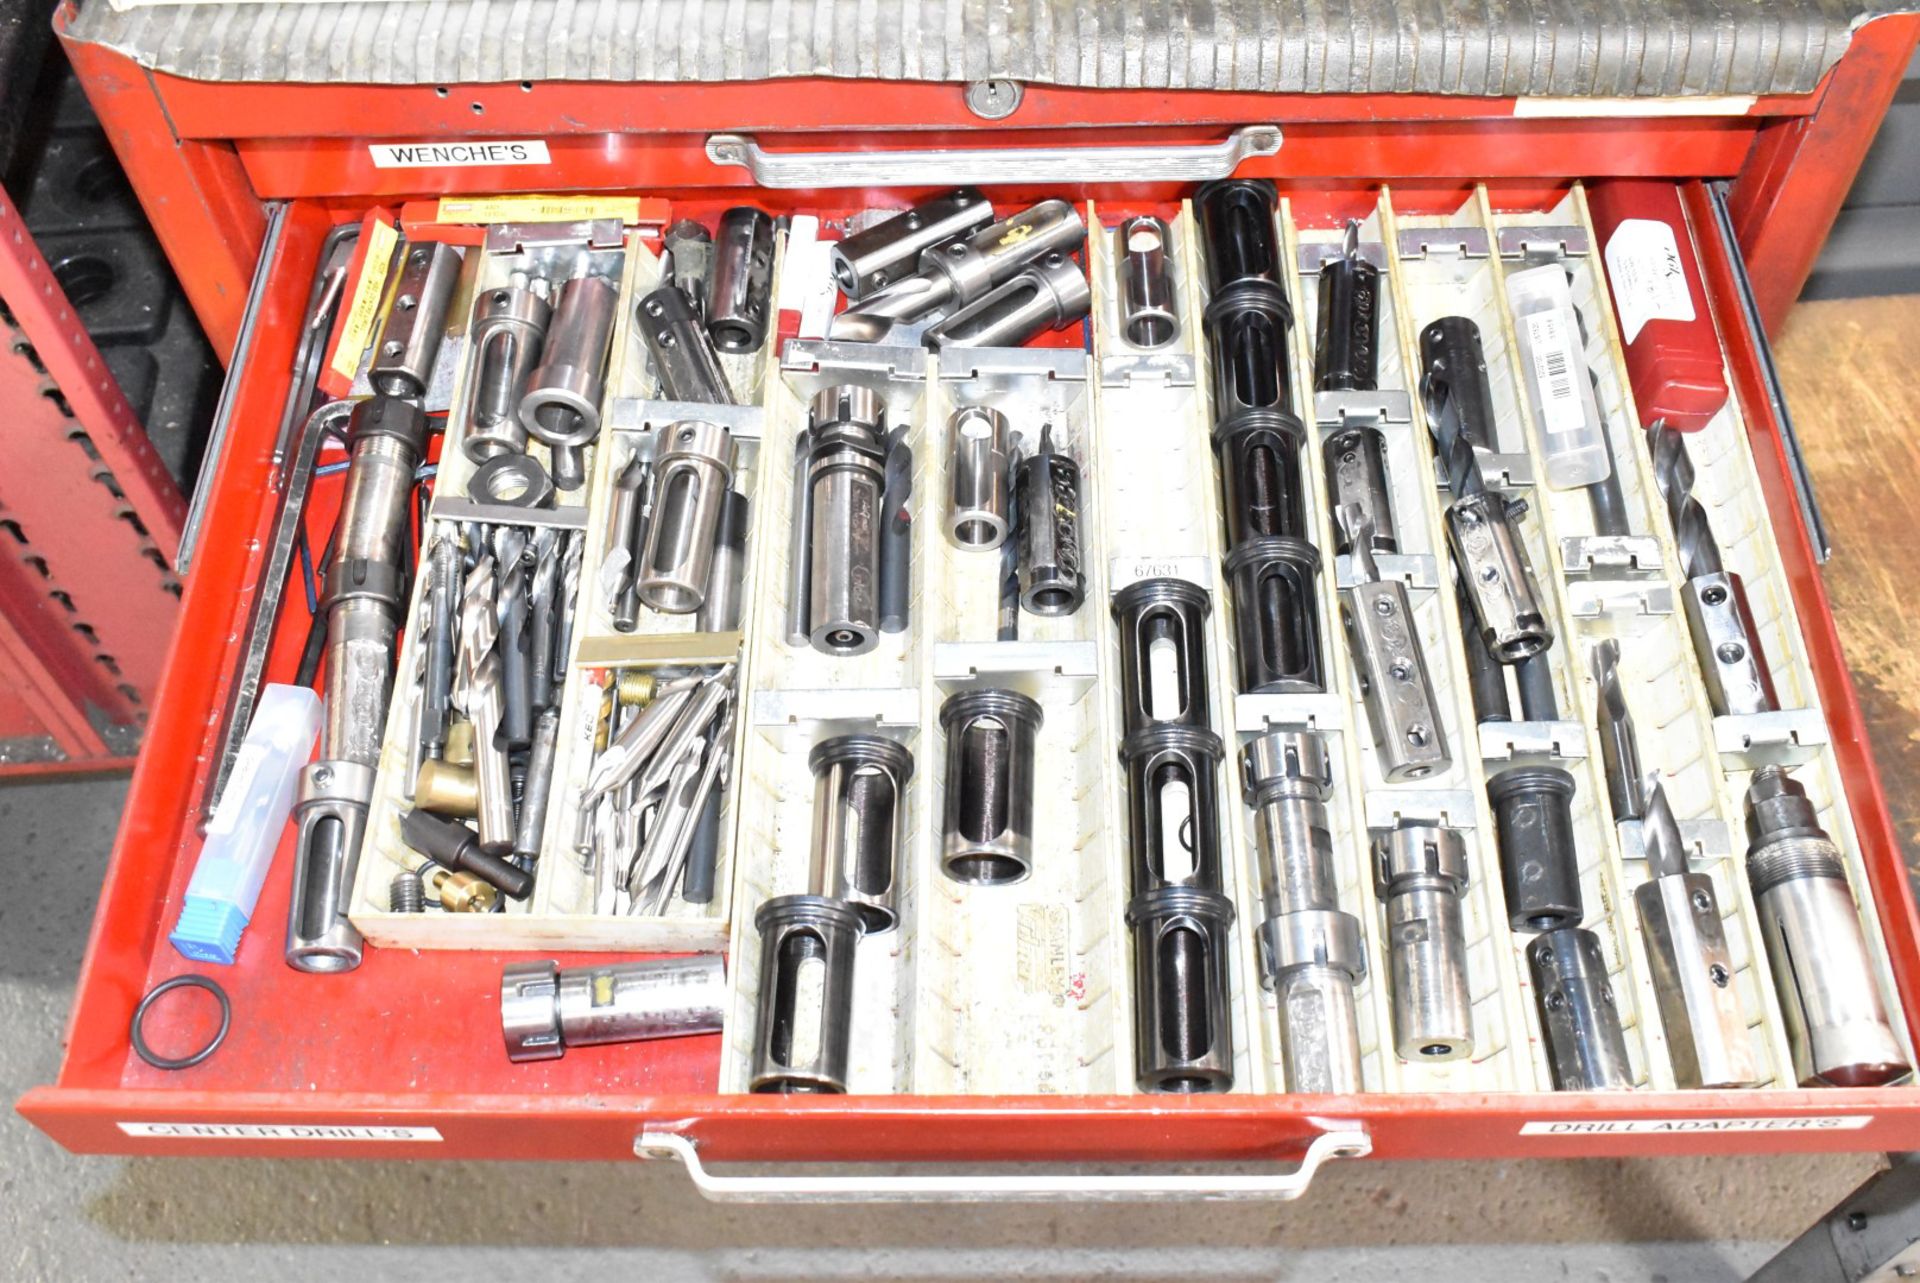 LOT/ ROLLING TOOLBOX WITH CHUCK JAWS, COLLETS, SLEEVES & HAND TOOLS - Image 3 of 8